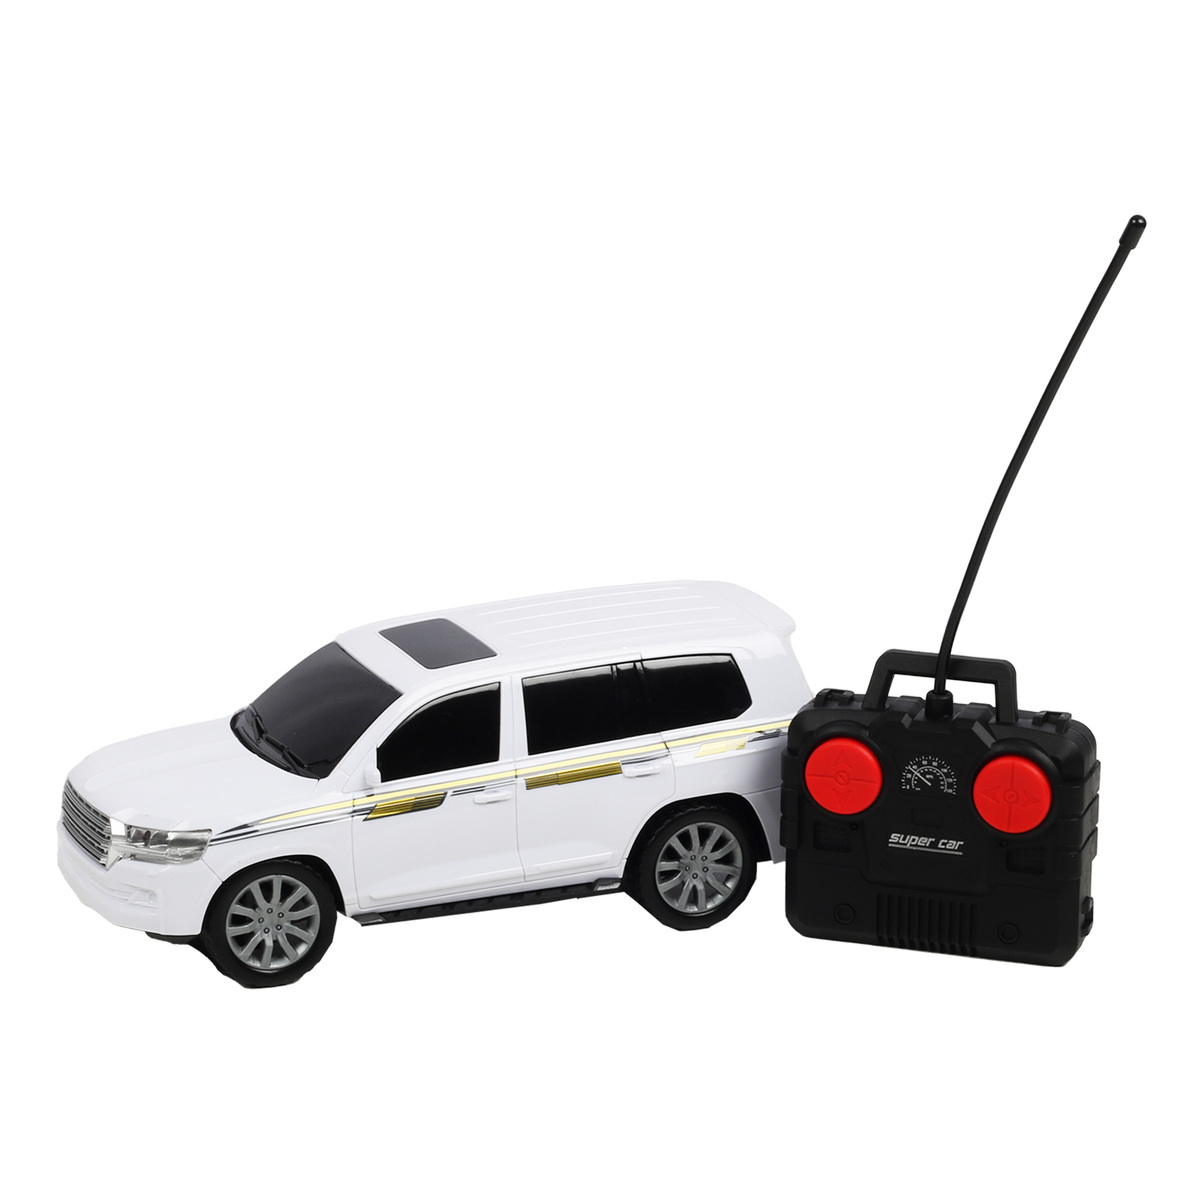 Skid Fusion Rechargeable Remote Control Car 1:14 5514-8